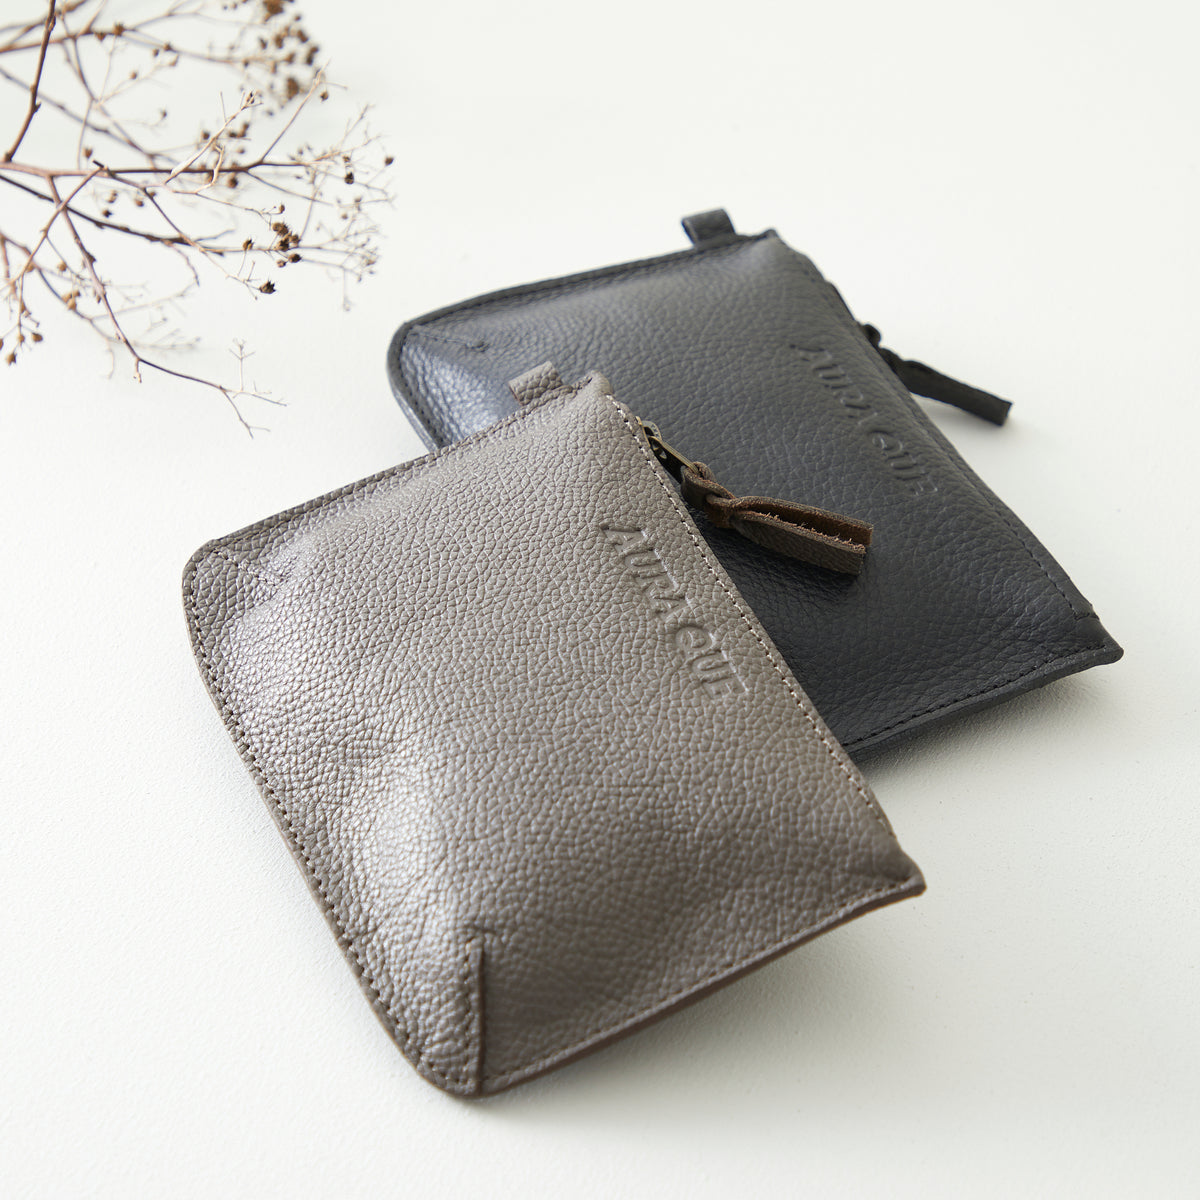 Get a hold of these classic coin purses. Shop the Auria coin purse at